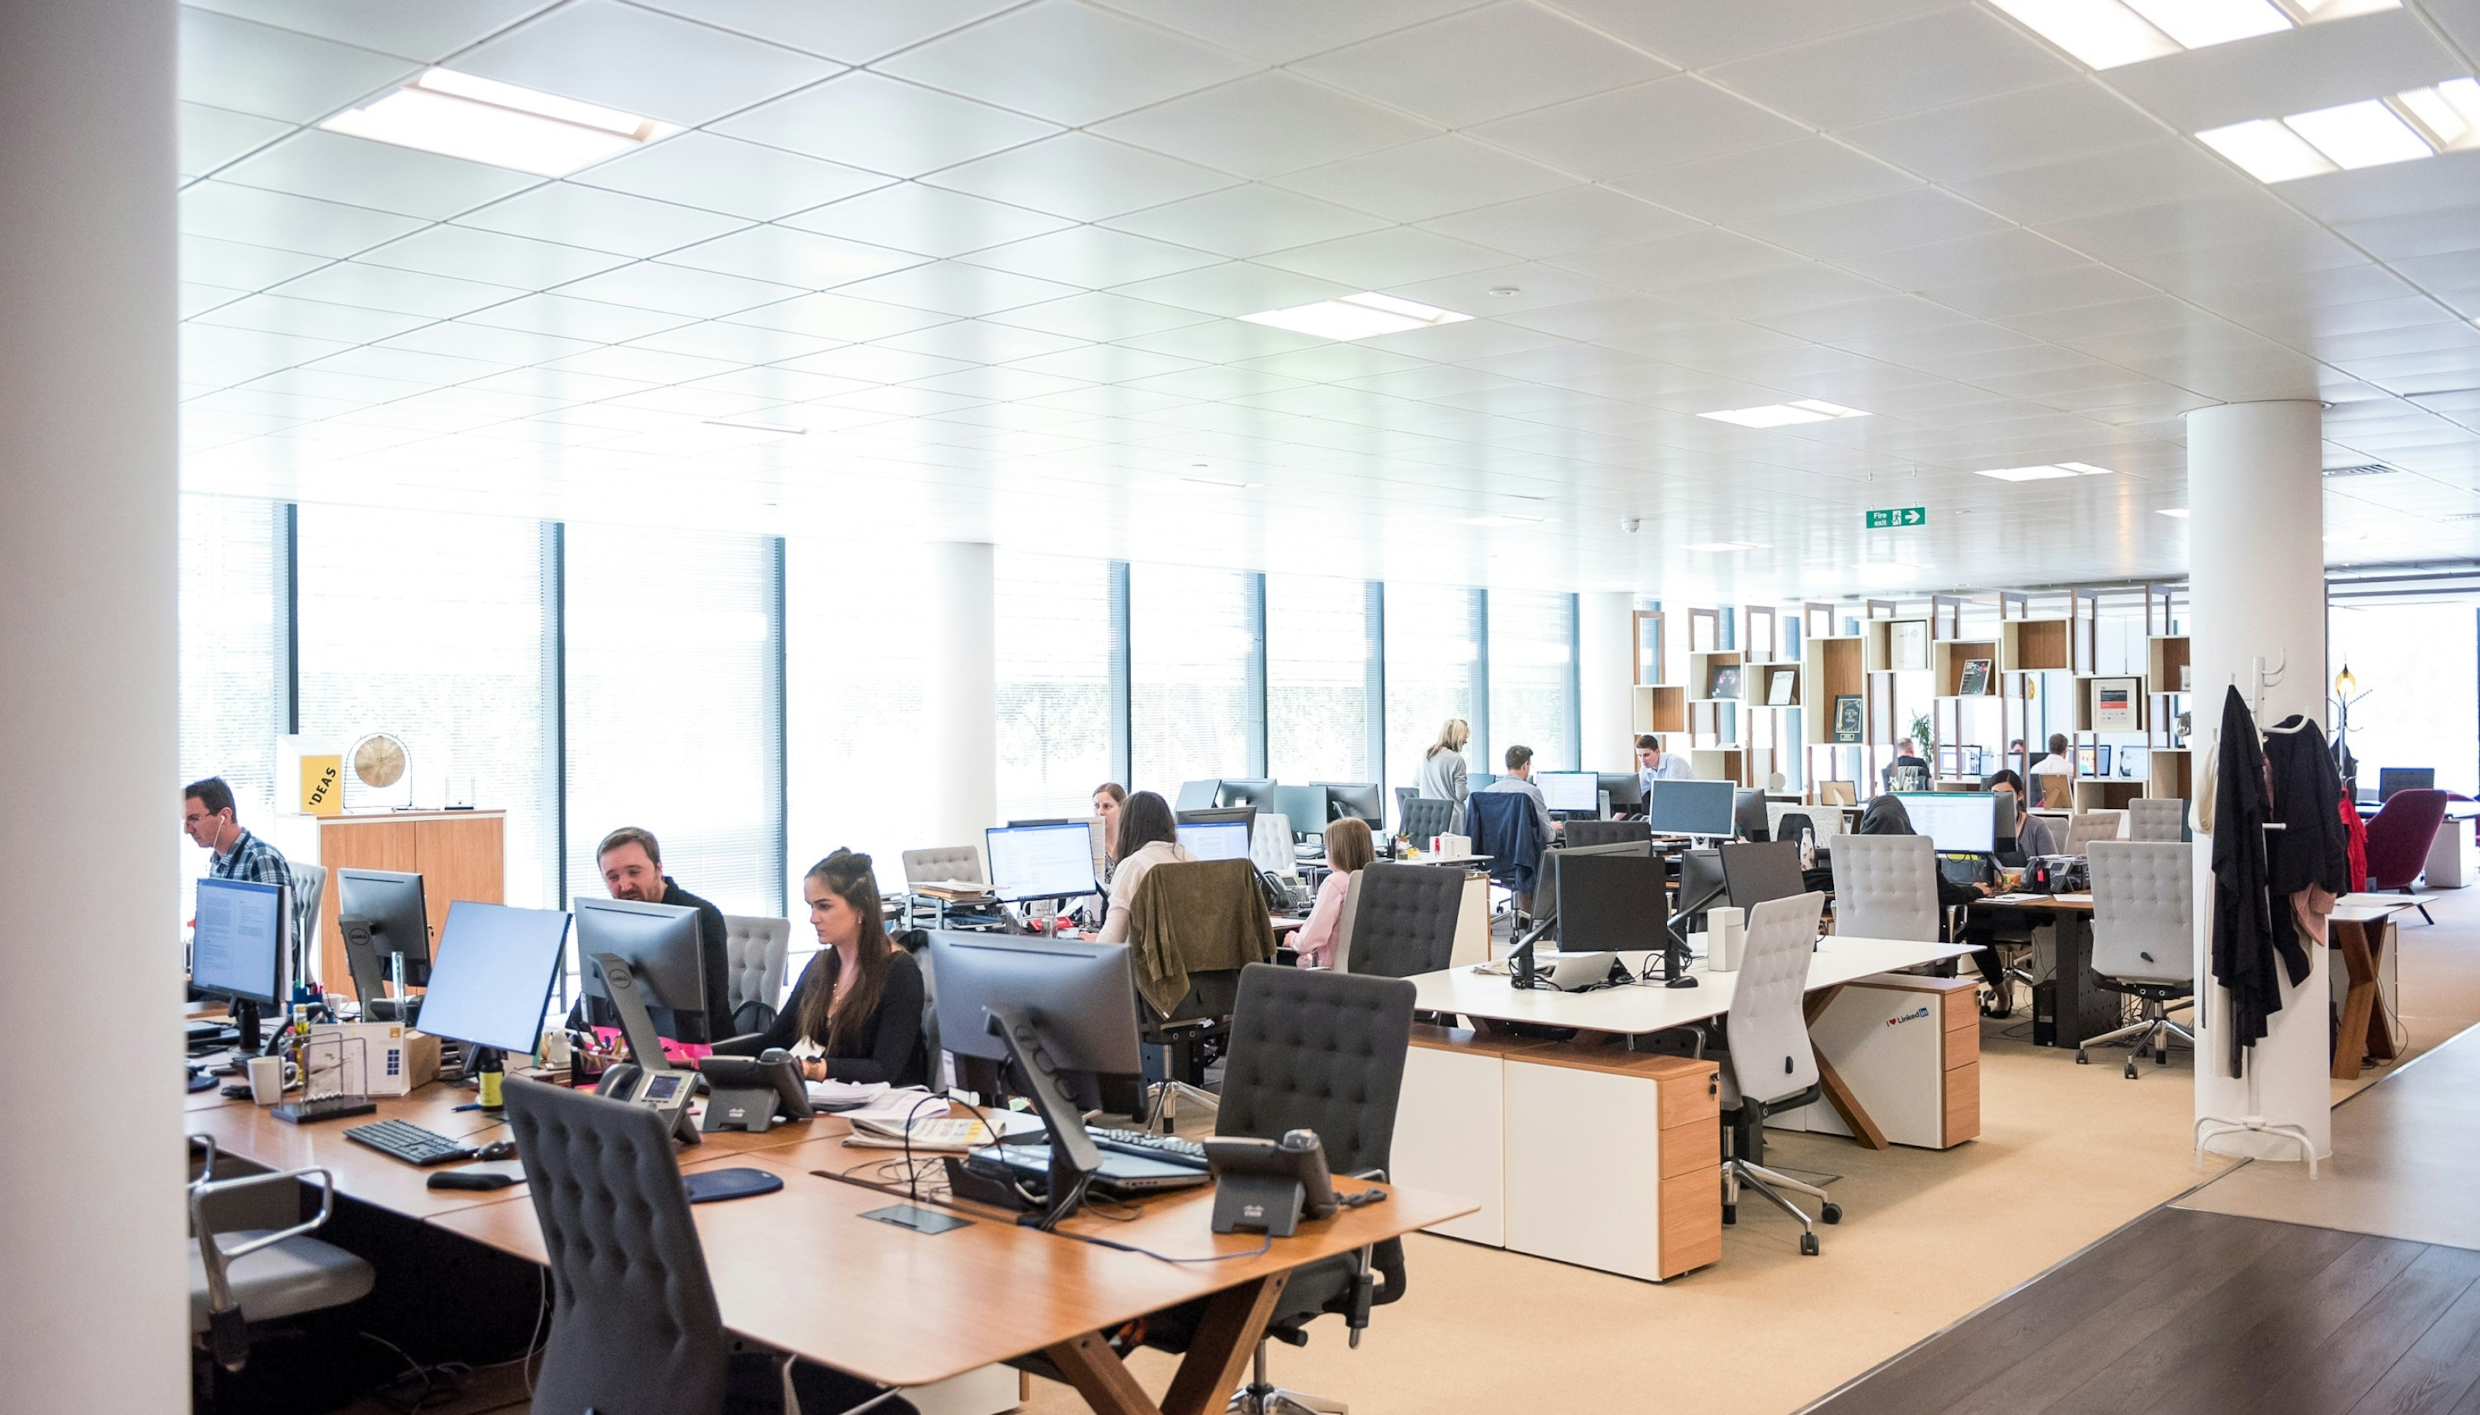 Hot Desking: 5 Pros and Cons to Consider